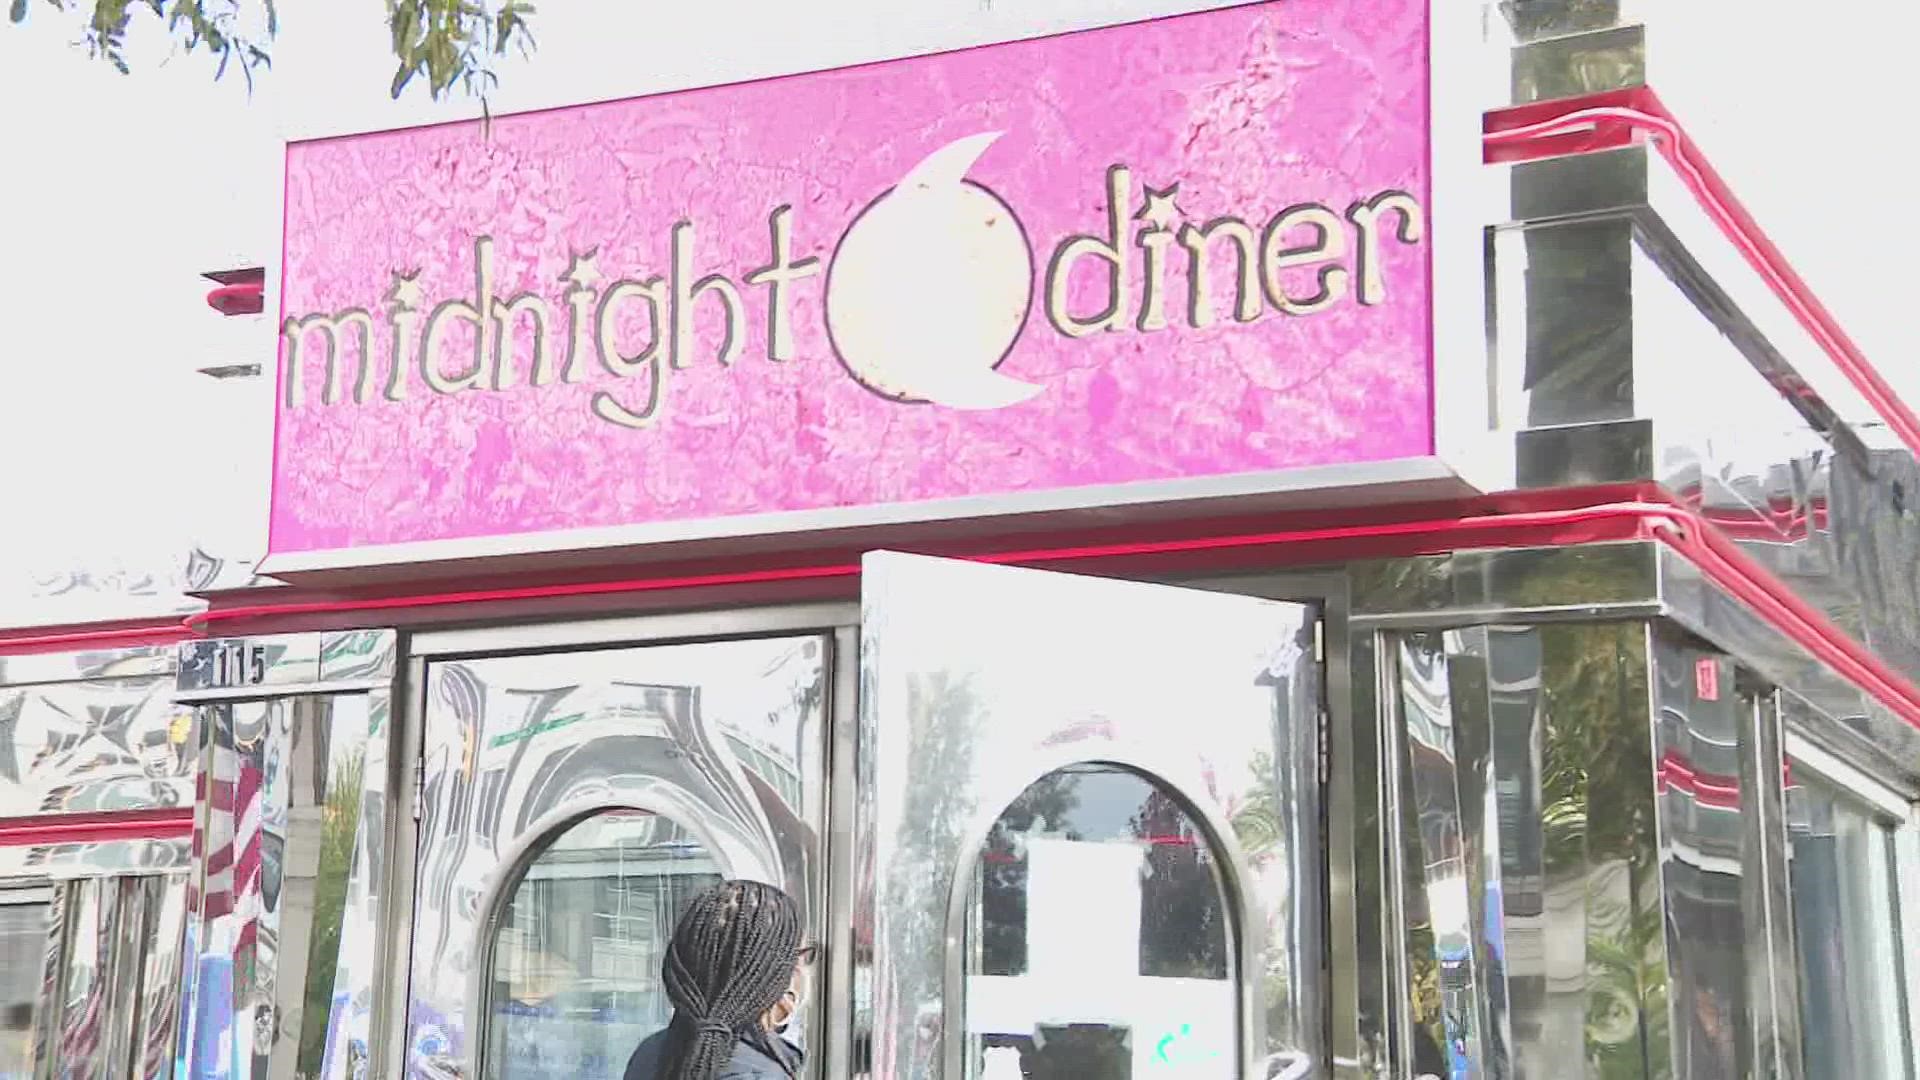 According to a permit filed with the City of Charlotte this month, the diner will head to East Trade Street -- near the Spectrum Center.